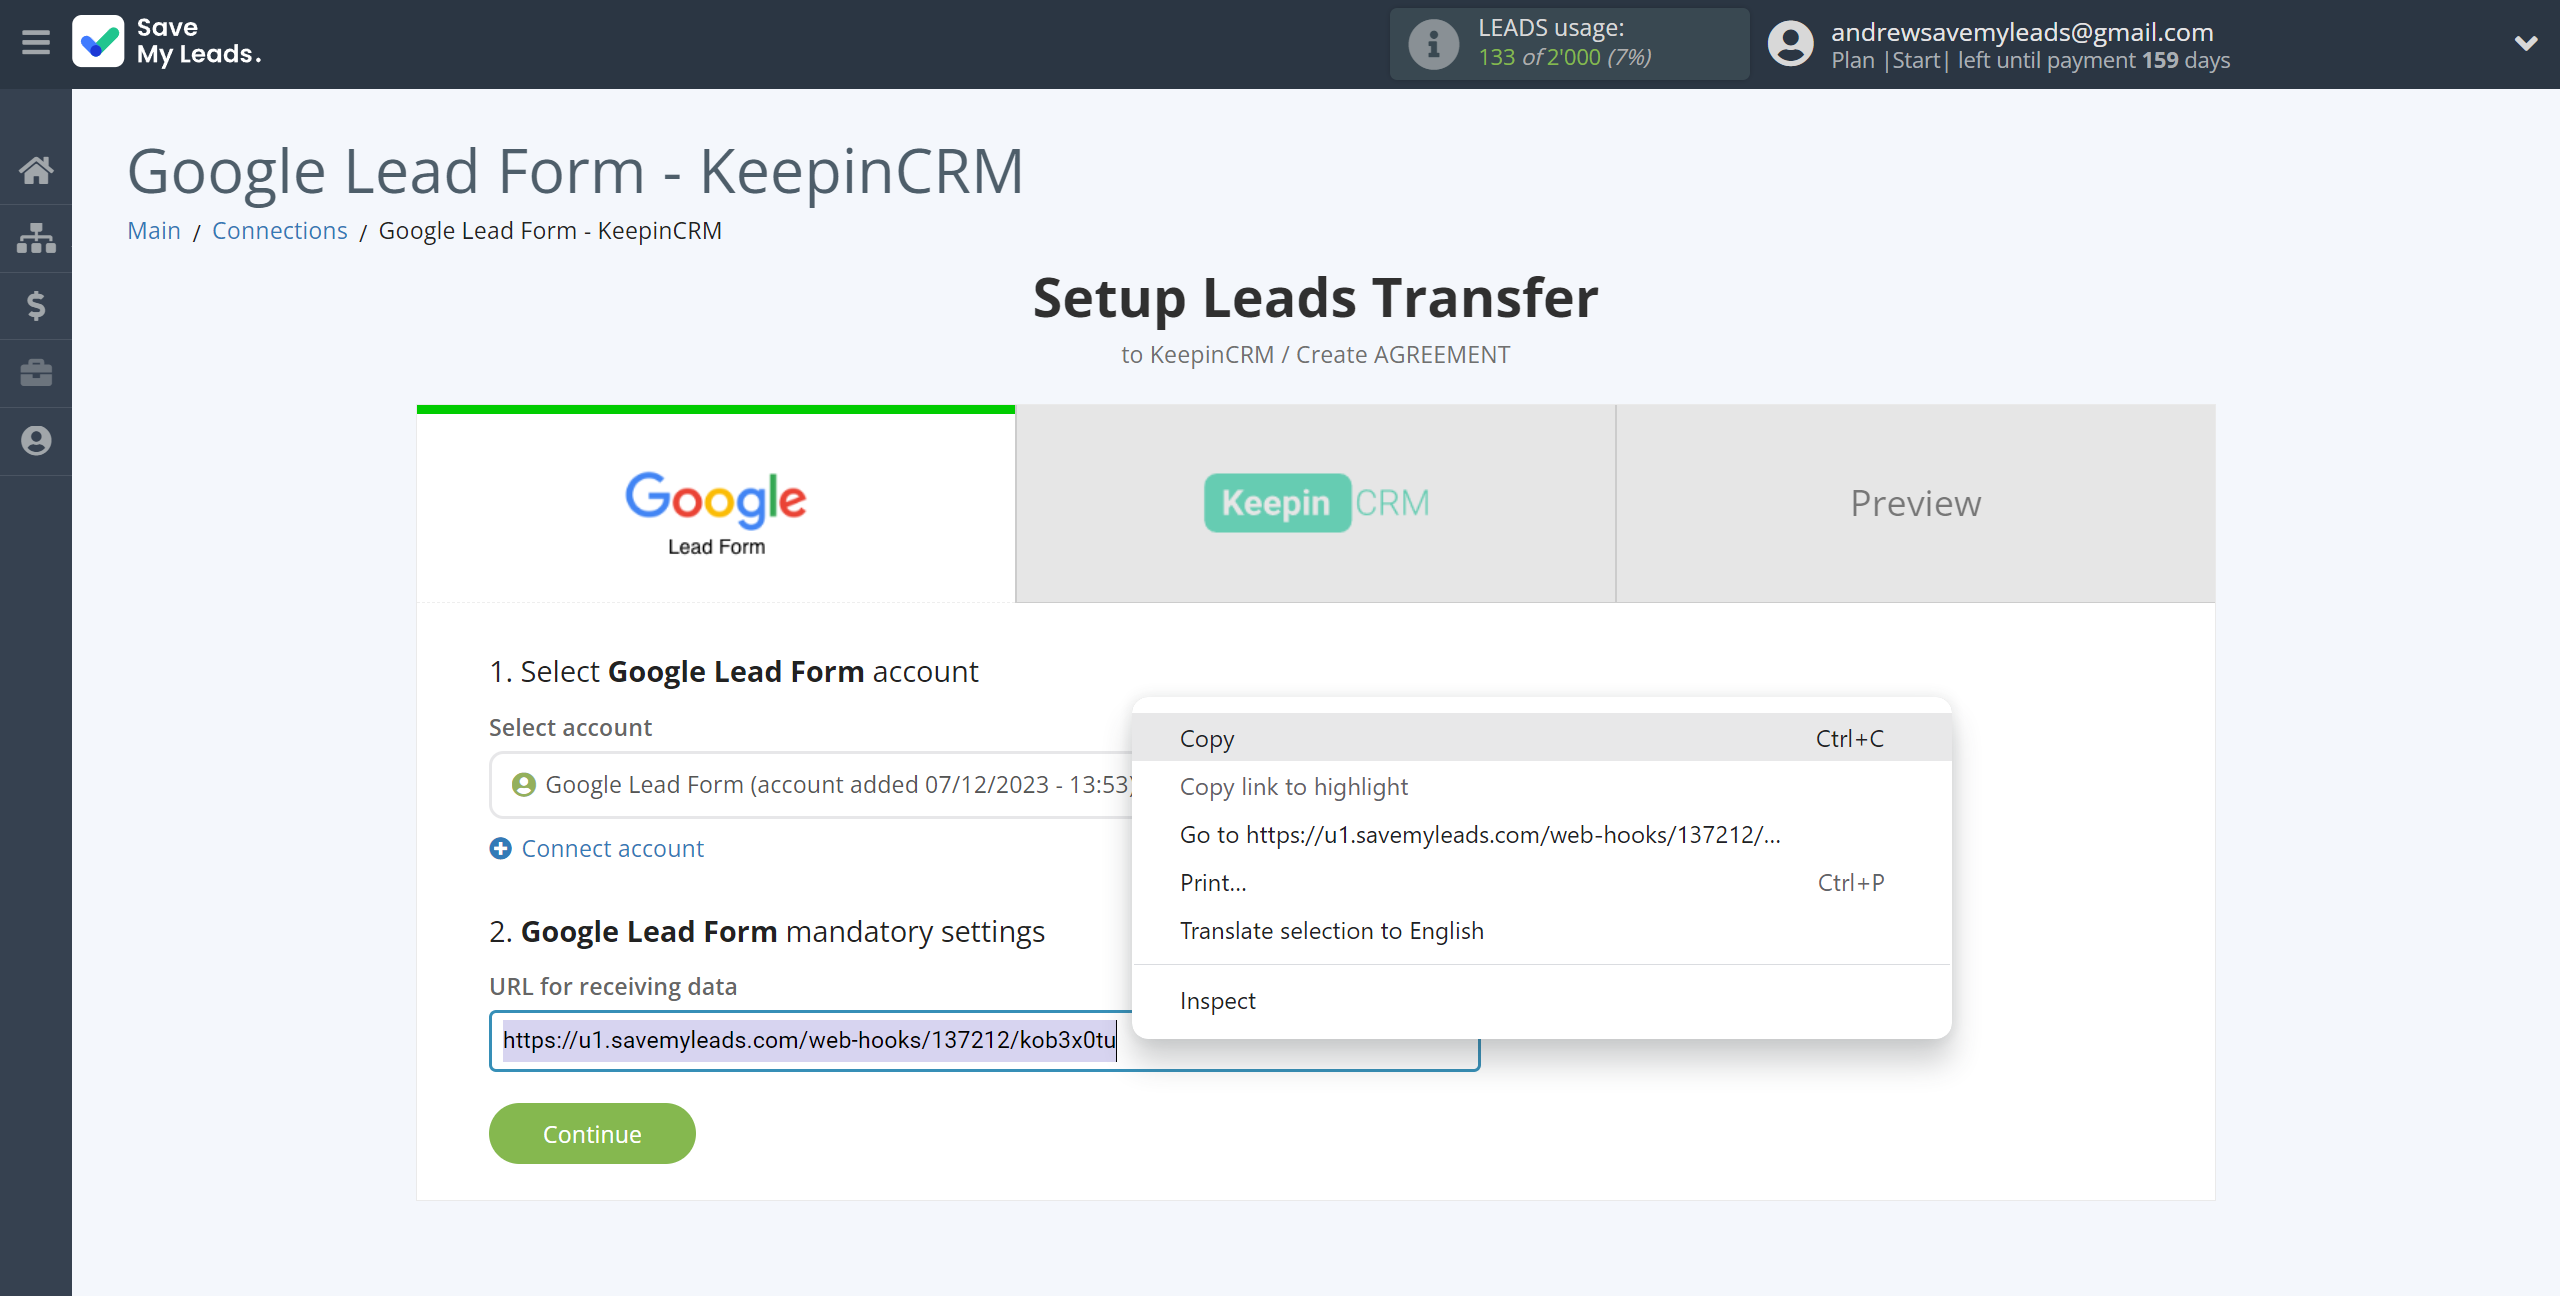 How to Connect Google Lead Form with KeepinCRM Create Agreement | Data Source account connection